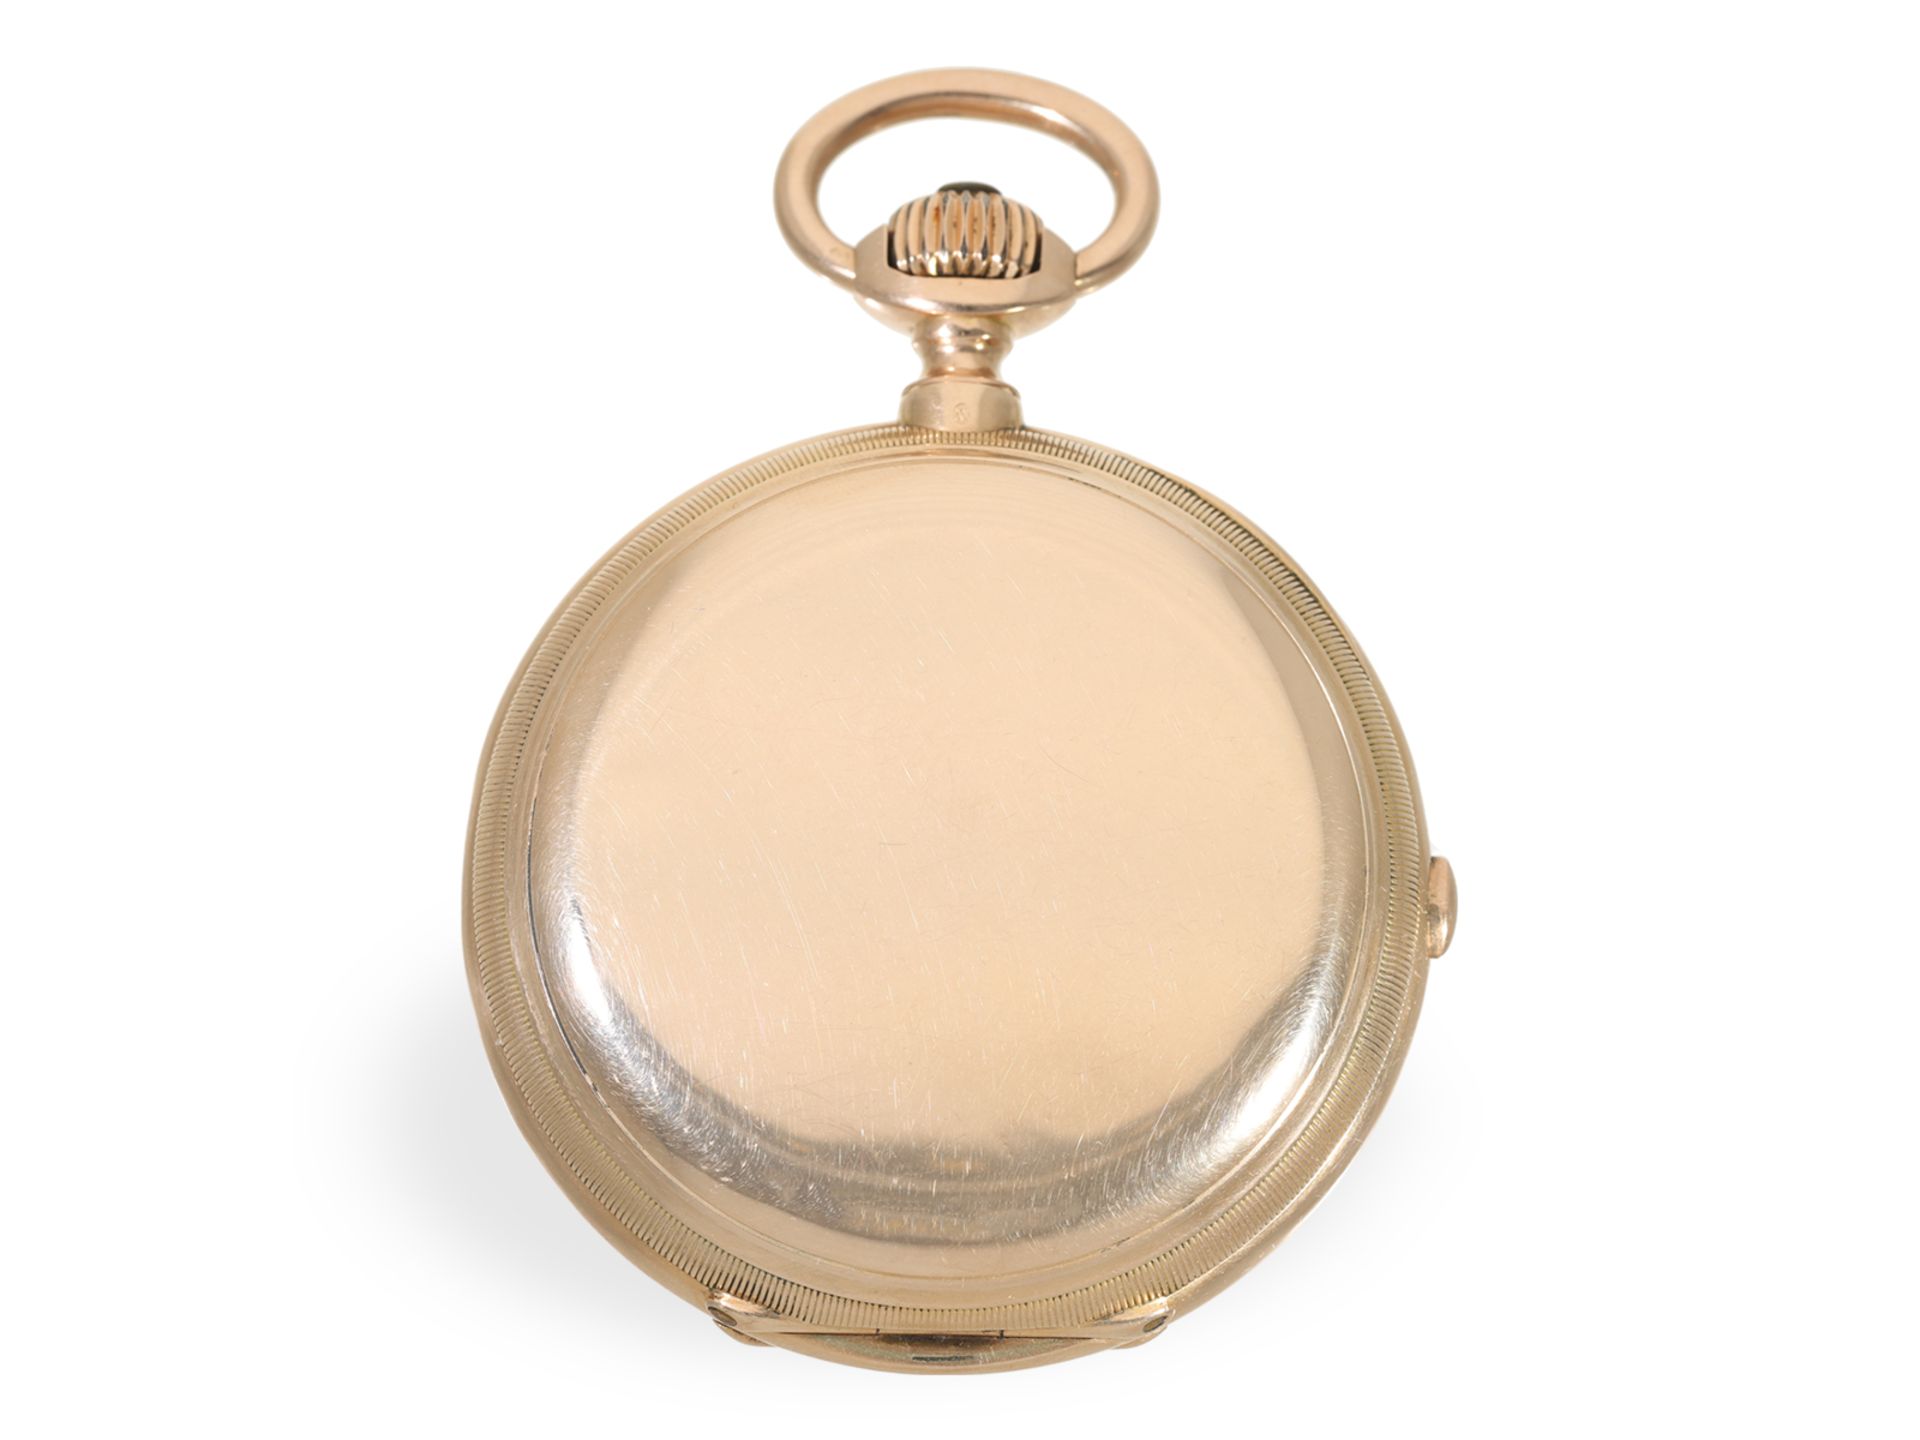 Pocket watch: especially heavy Ankerchronometer with chronograph, ca. 1890 - Image 7 of 8